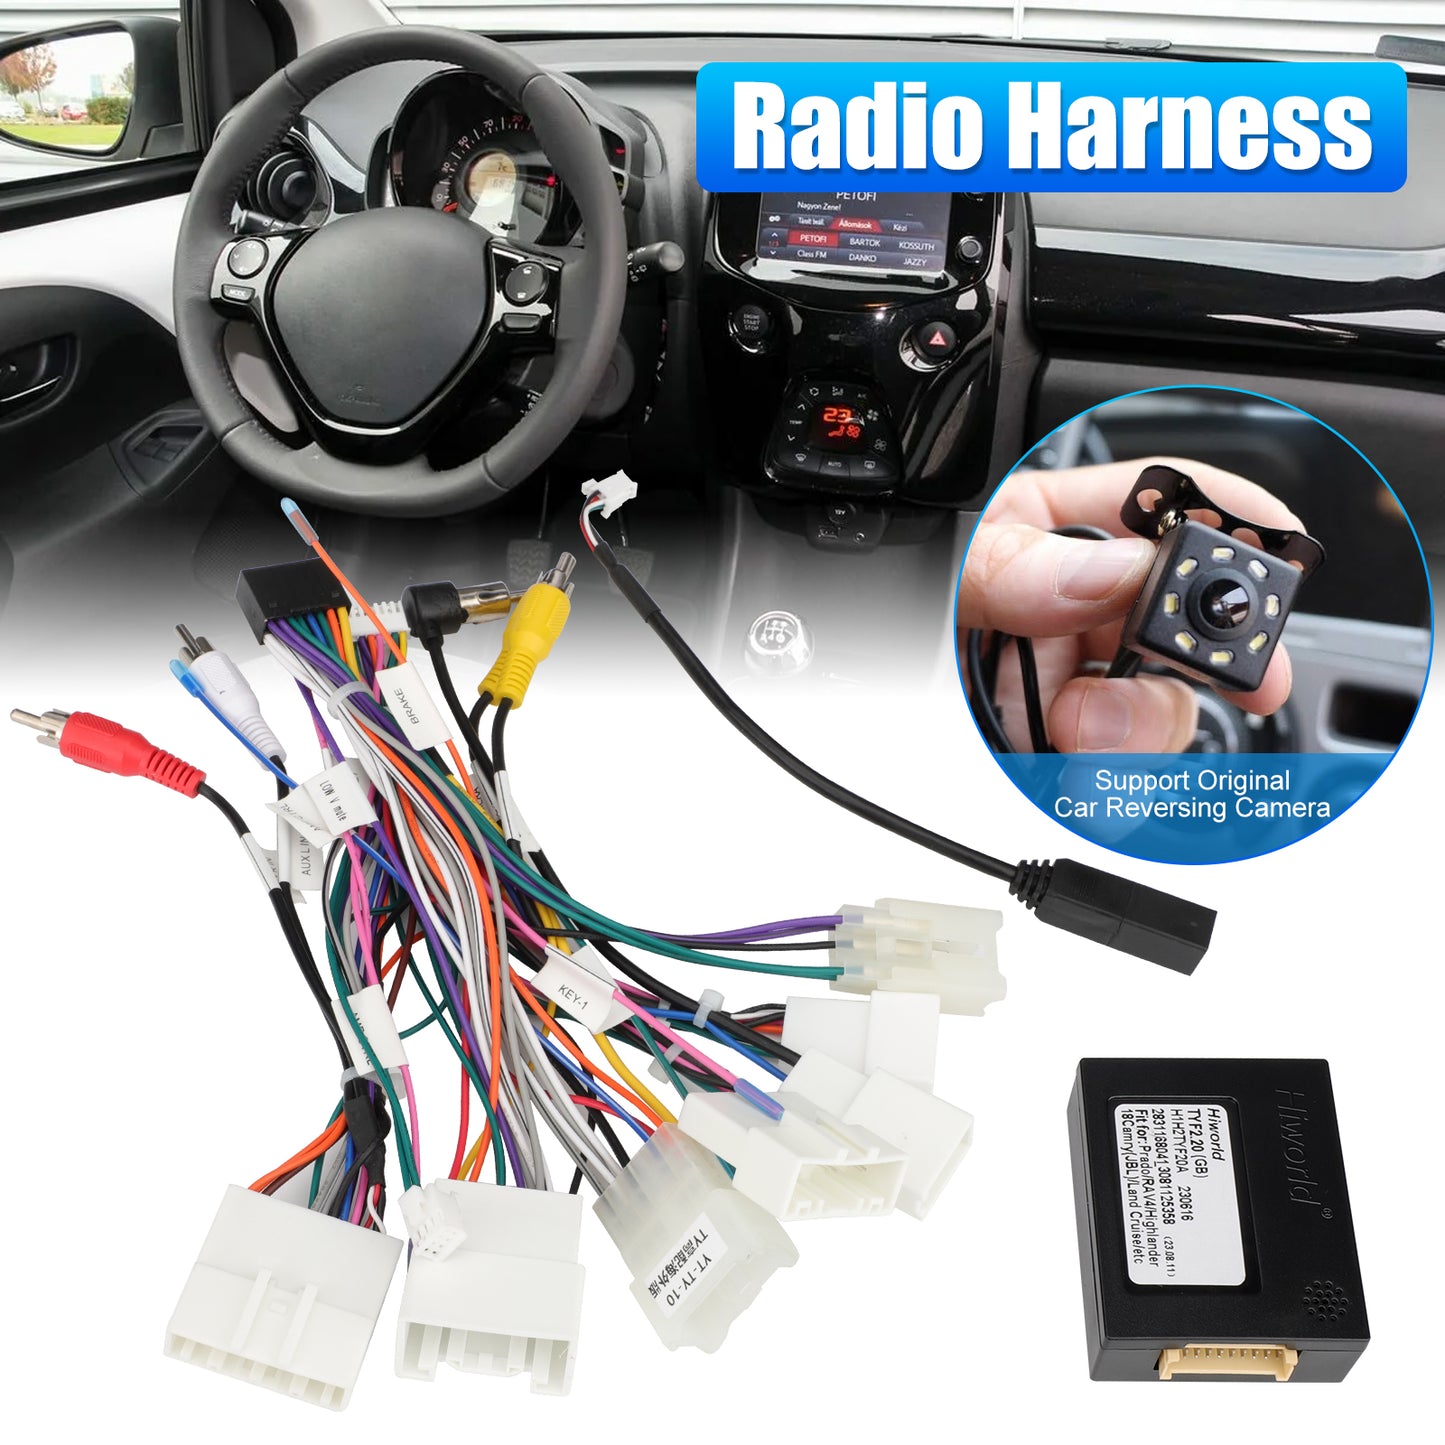 Car Stereo Wiring Harness for Toyota - JBL Support, OEM Camera Compatibility, Compatible with various Toyota models